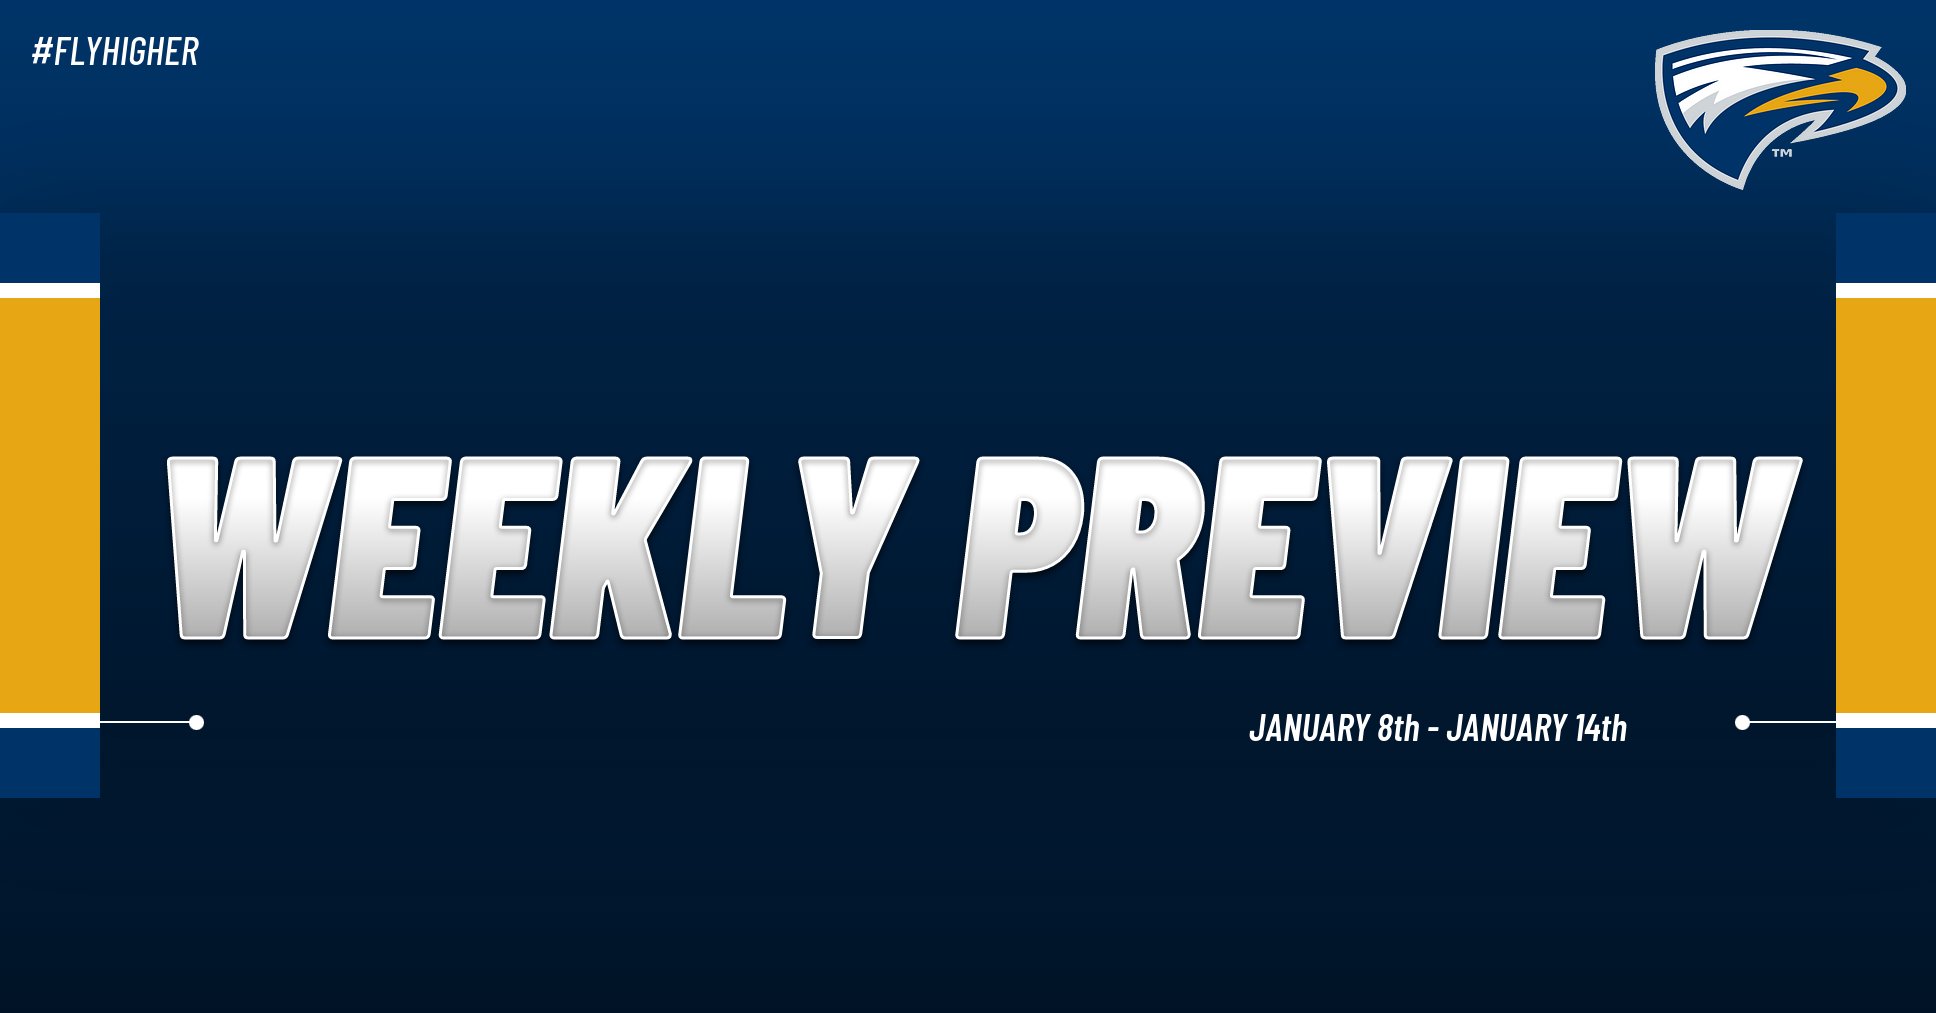 Emory Athletics Weekly Preview: January 8th - January 14th